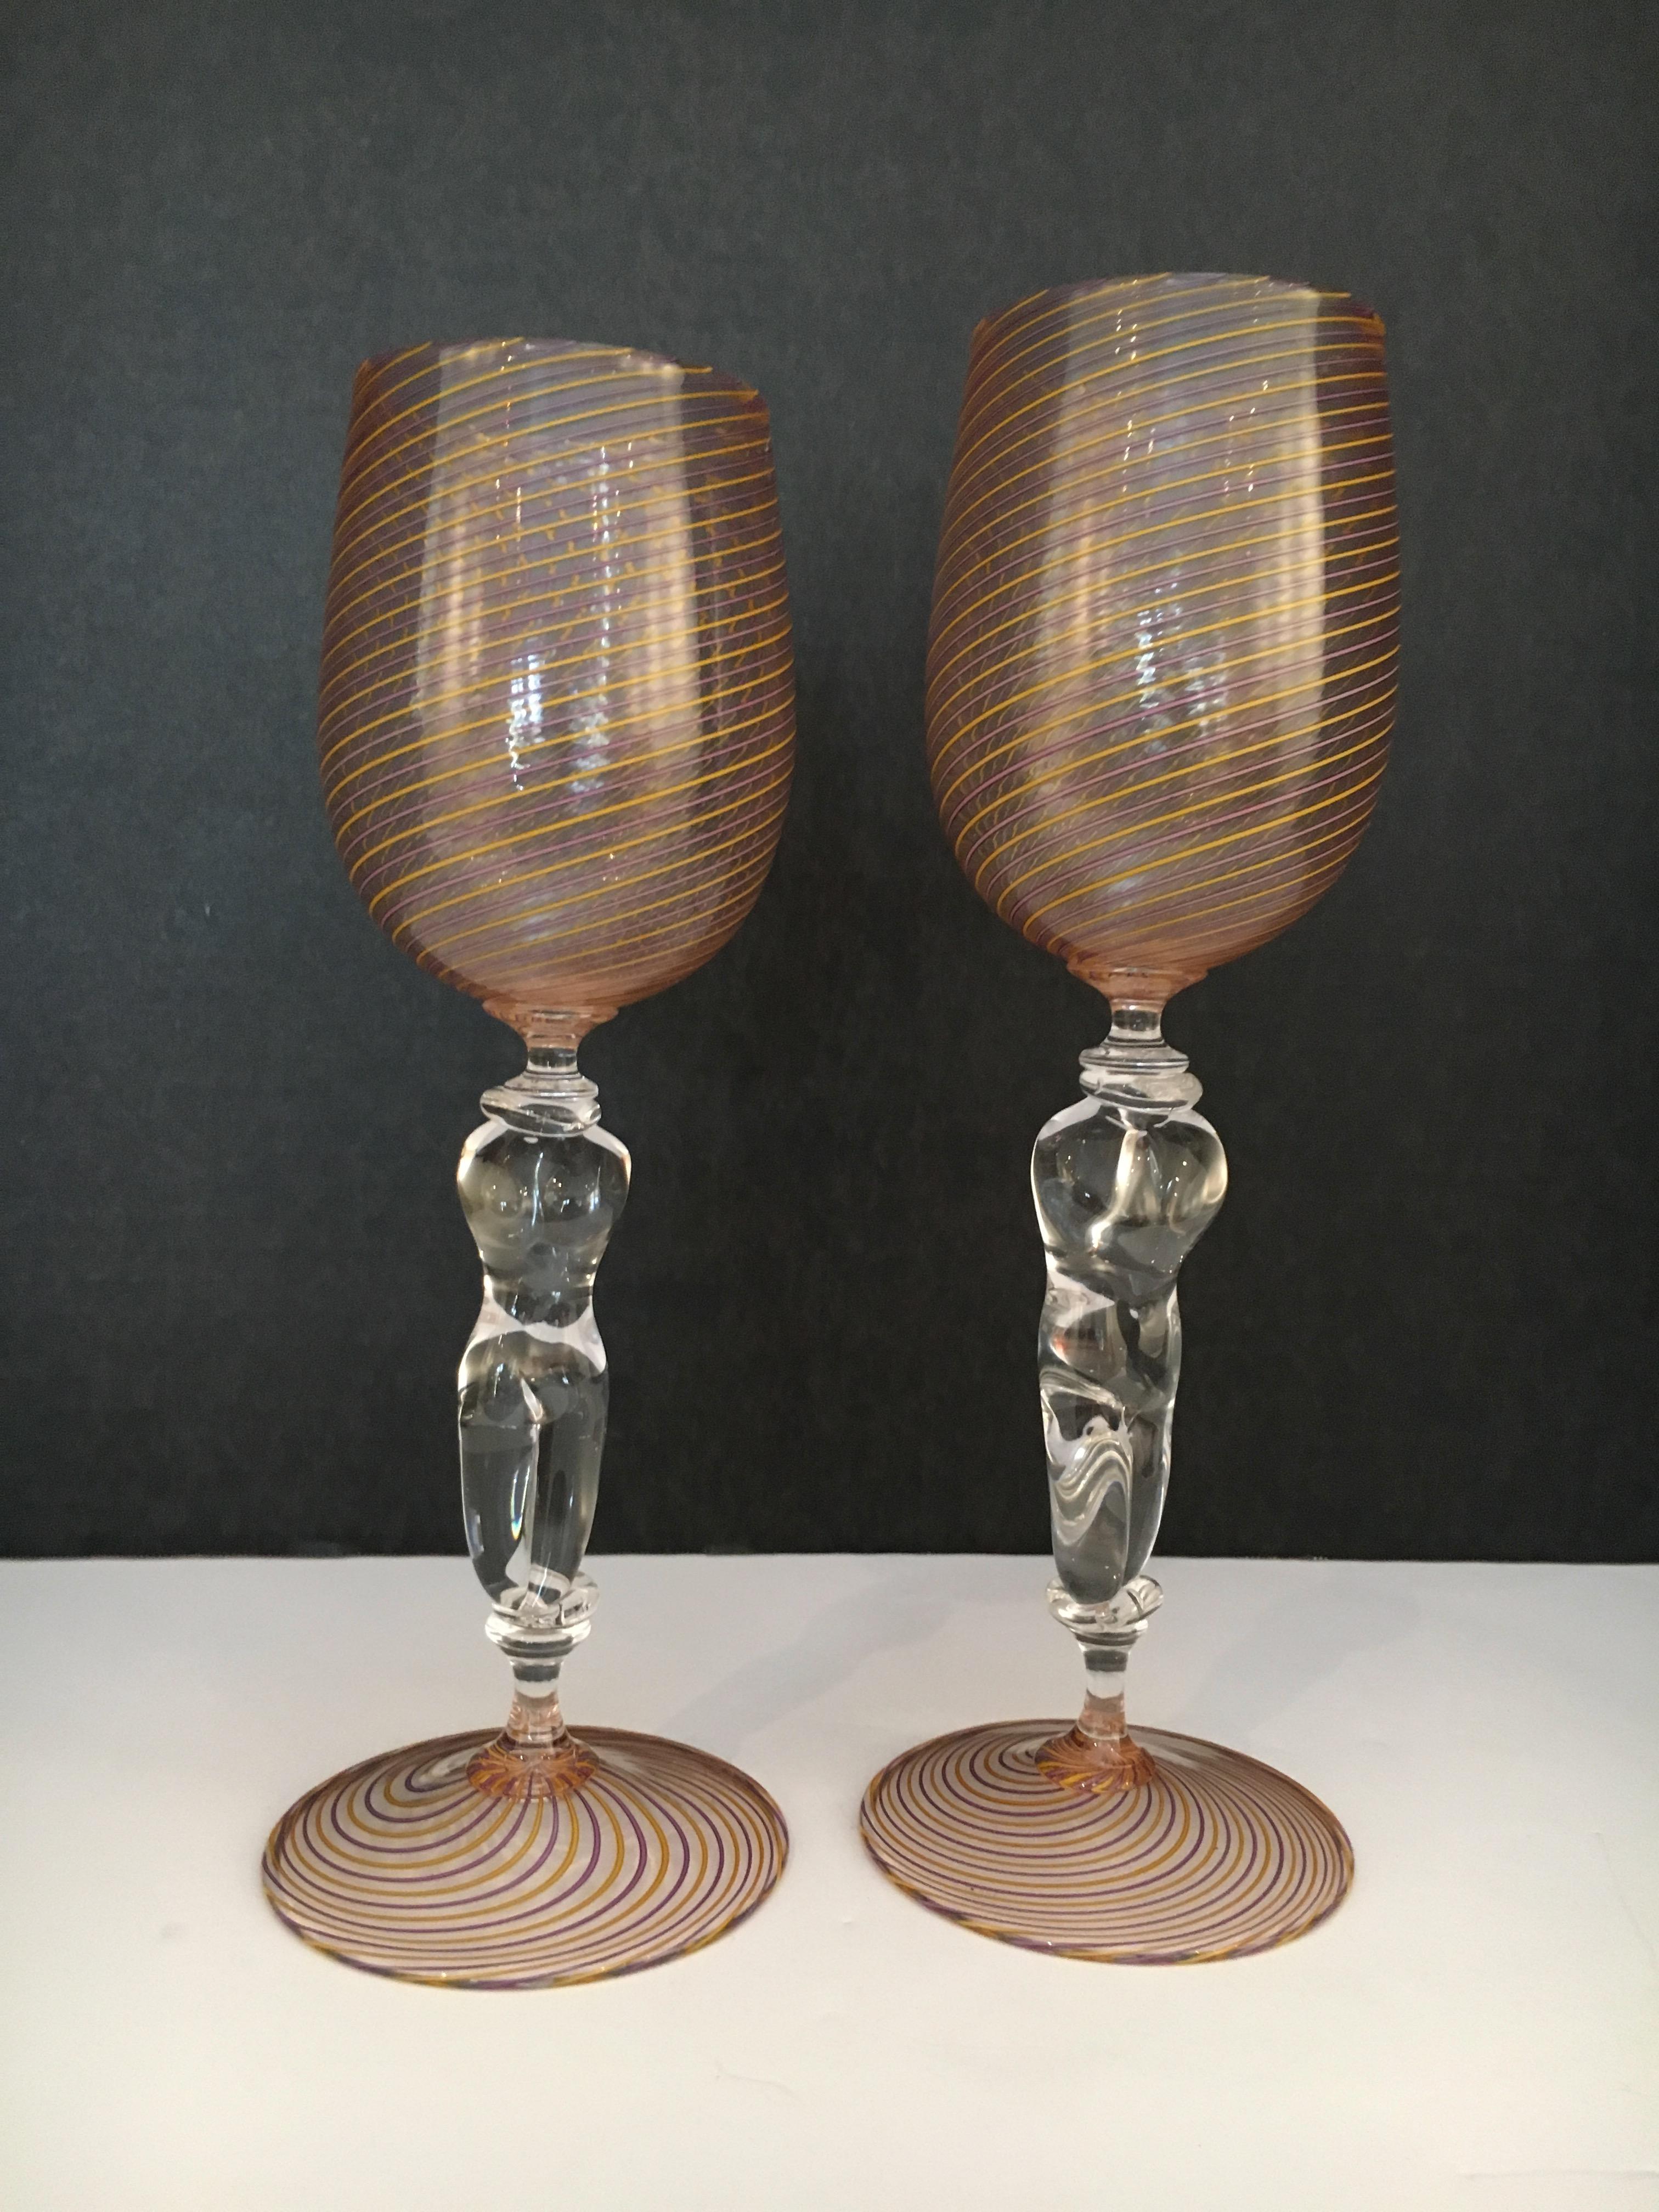 Handblown his and hers stemmed wine glasses- Artfully designed. Perfect for the perfect couple 

A phenomenal Wedding Gift from the Curated Giver.